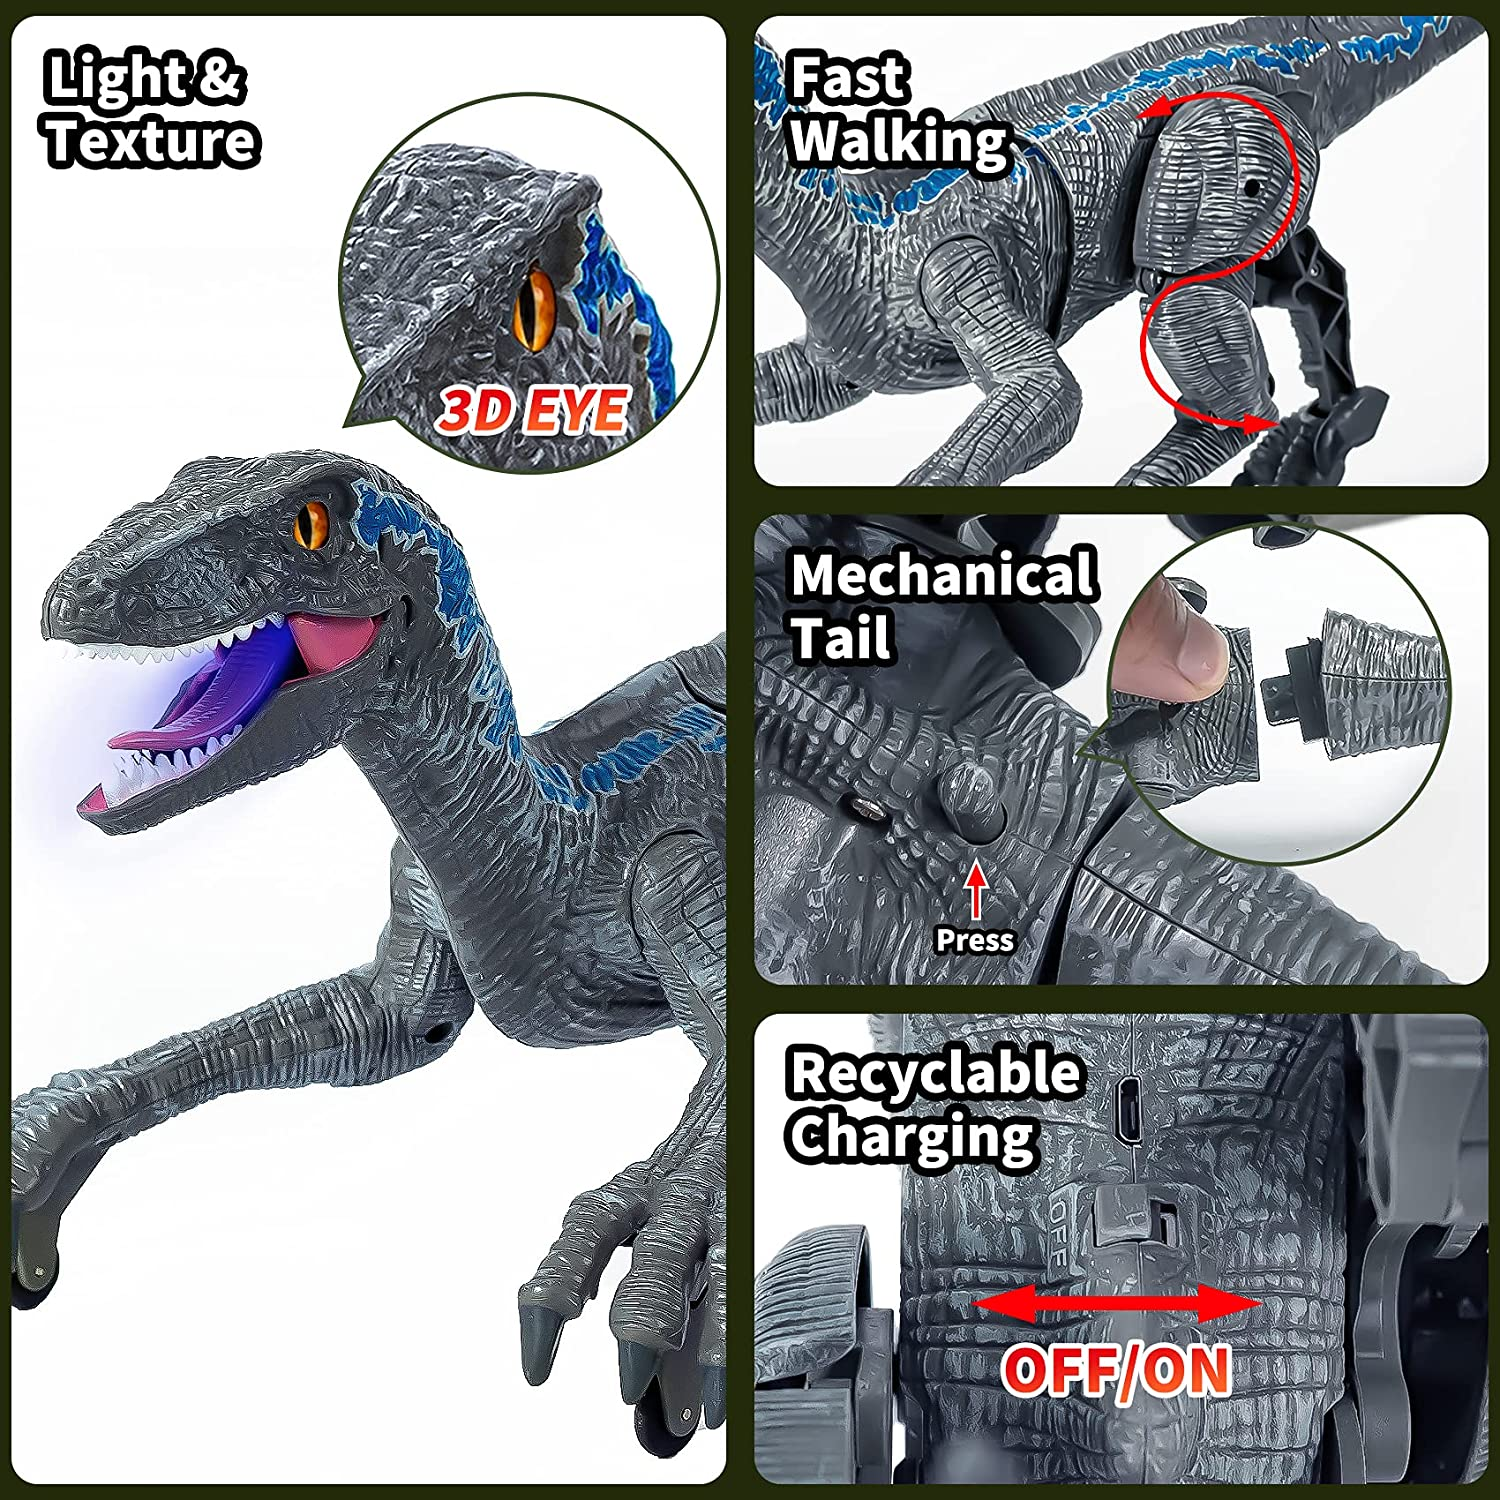 (🔥Last Day Promotion- SAVE 70% OFF)Remote Control Velociraptor-FREE SHIPPING TODAY